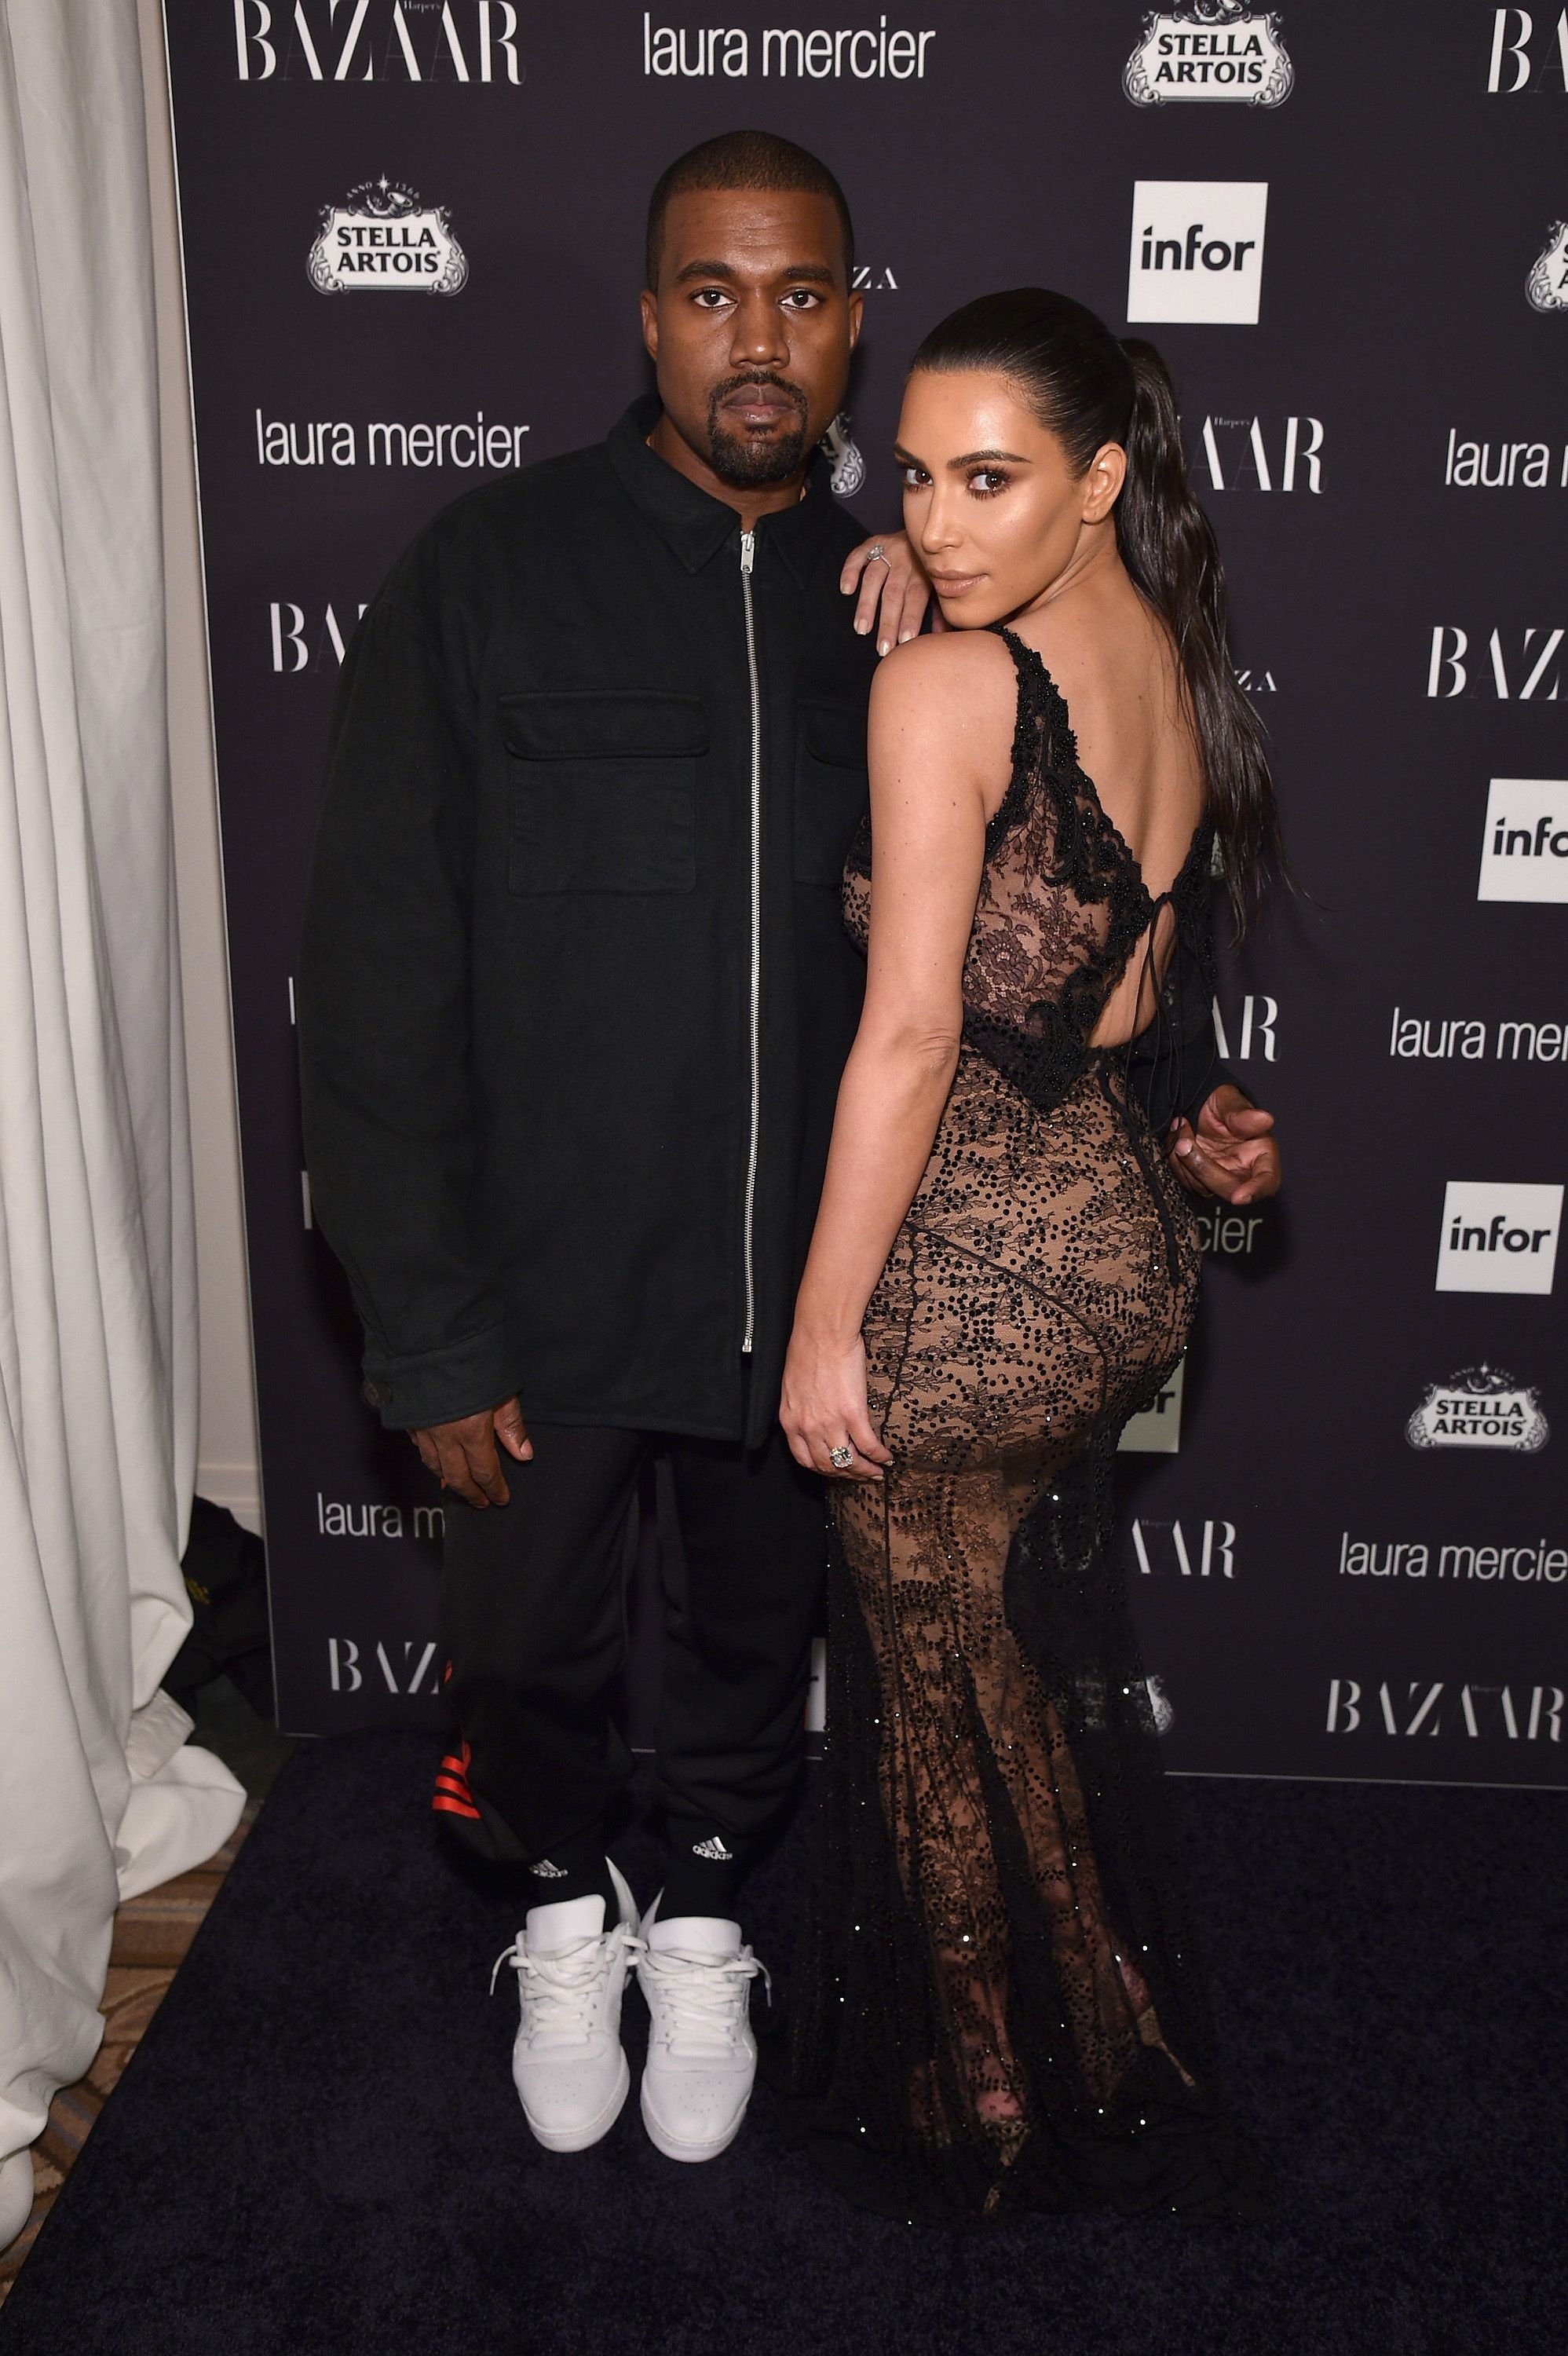 Kanye West and Kim Kardashian West at Harper's Bazaar's celebration of "ICONS By Carine Roitfeld" presented by Infor, Laura Mercier, and Stella Artois at The Plaza Hotel on September 9, 2016 | Photo: Getty Images